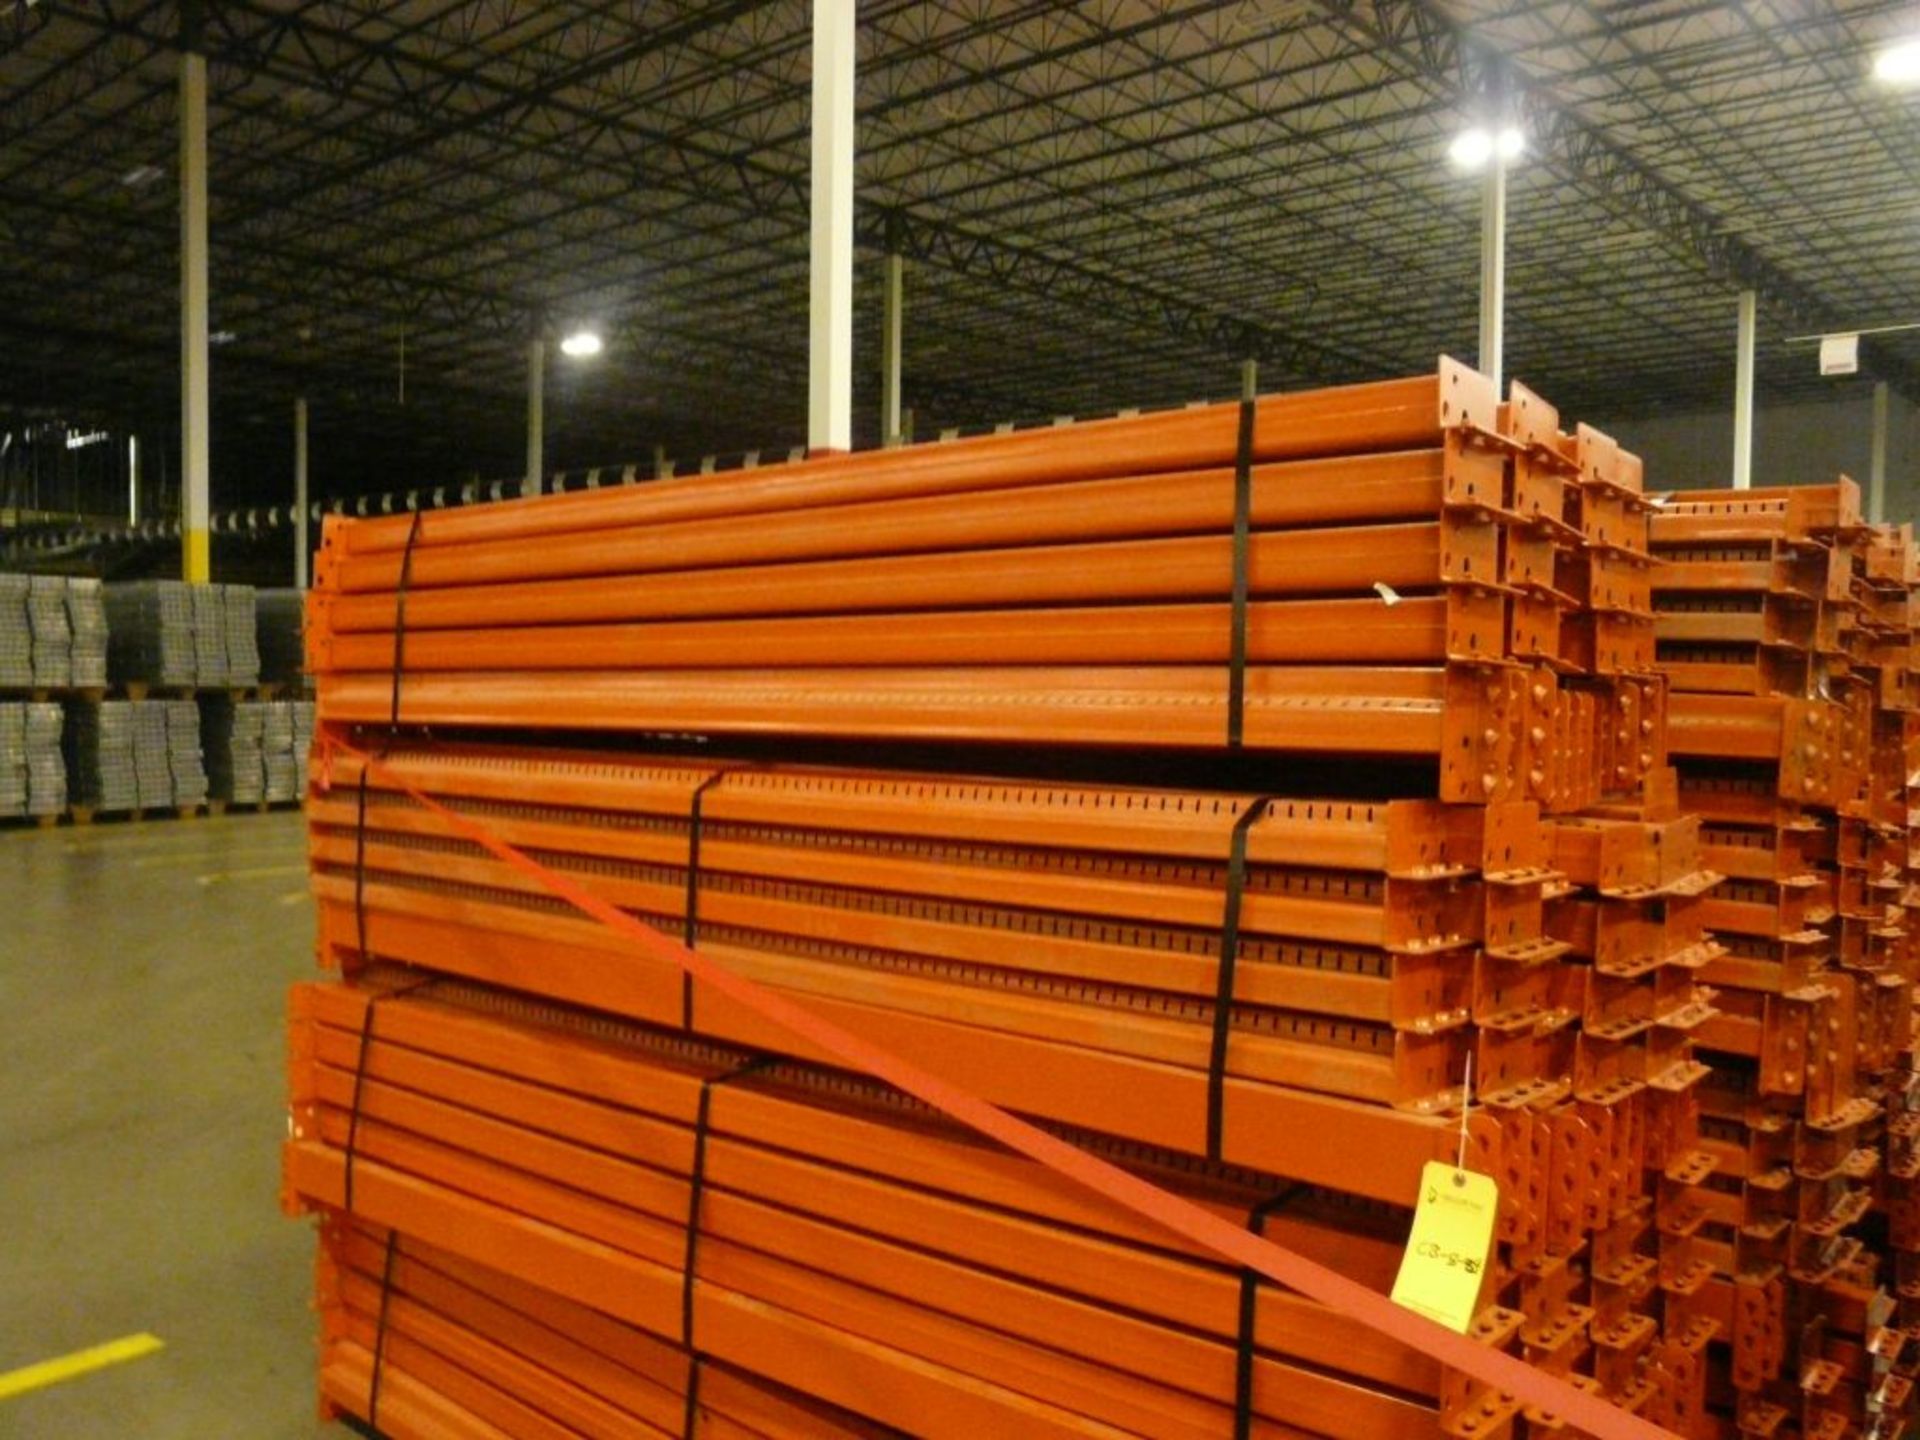 Lot of (115) 8' x 3" Slotted Crossbeams with F3M 6" 3-Tab End Plate - Either 2-3/4" 27E Slotted